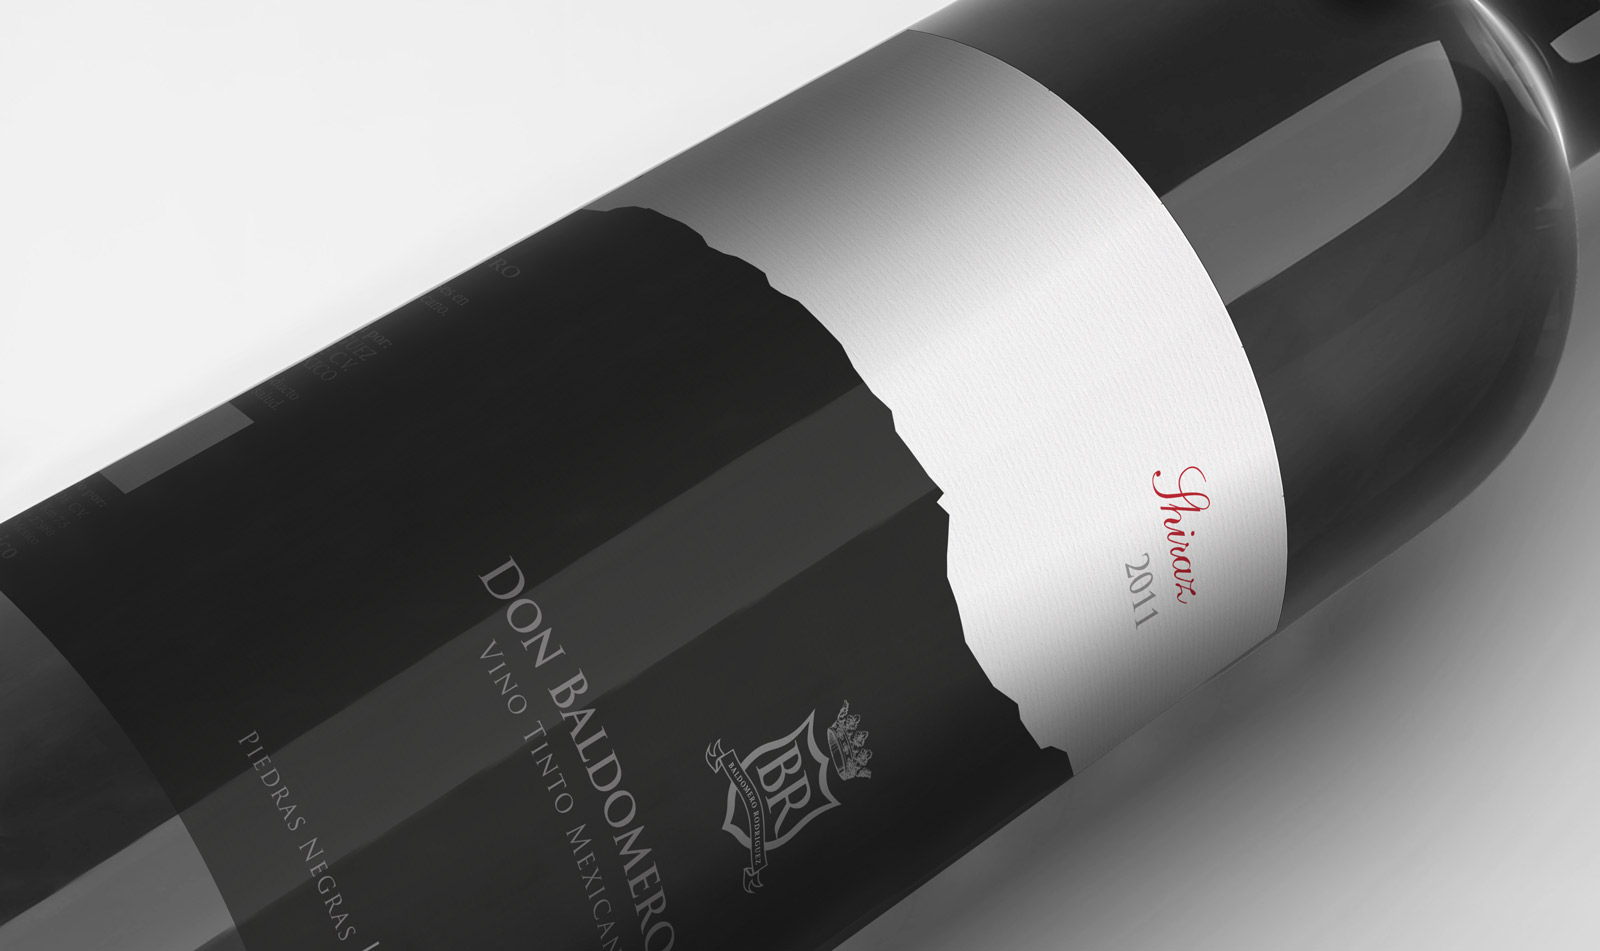 Portfolio of graphic and creative design works on wine labels and packaging for Mexican wine: DON BALDOMERO